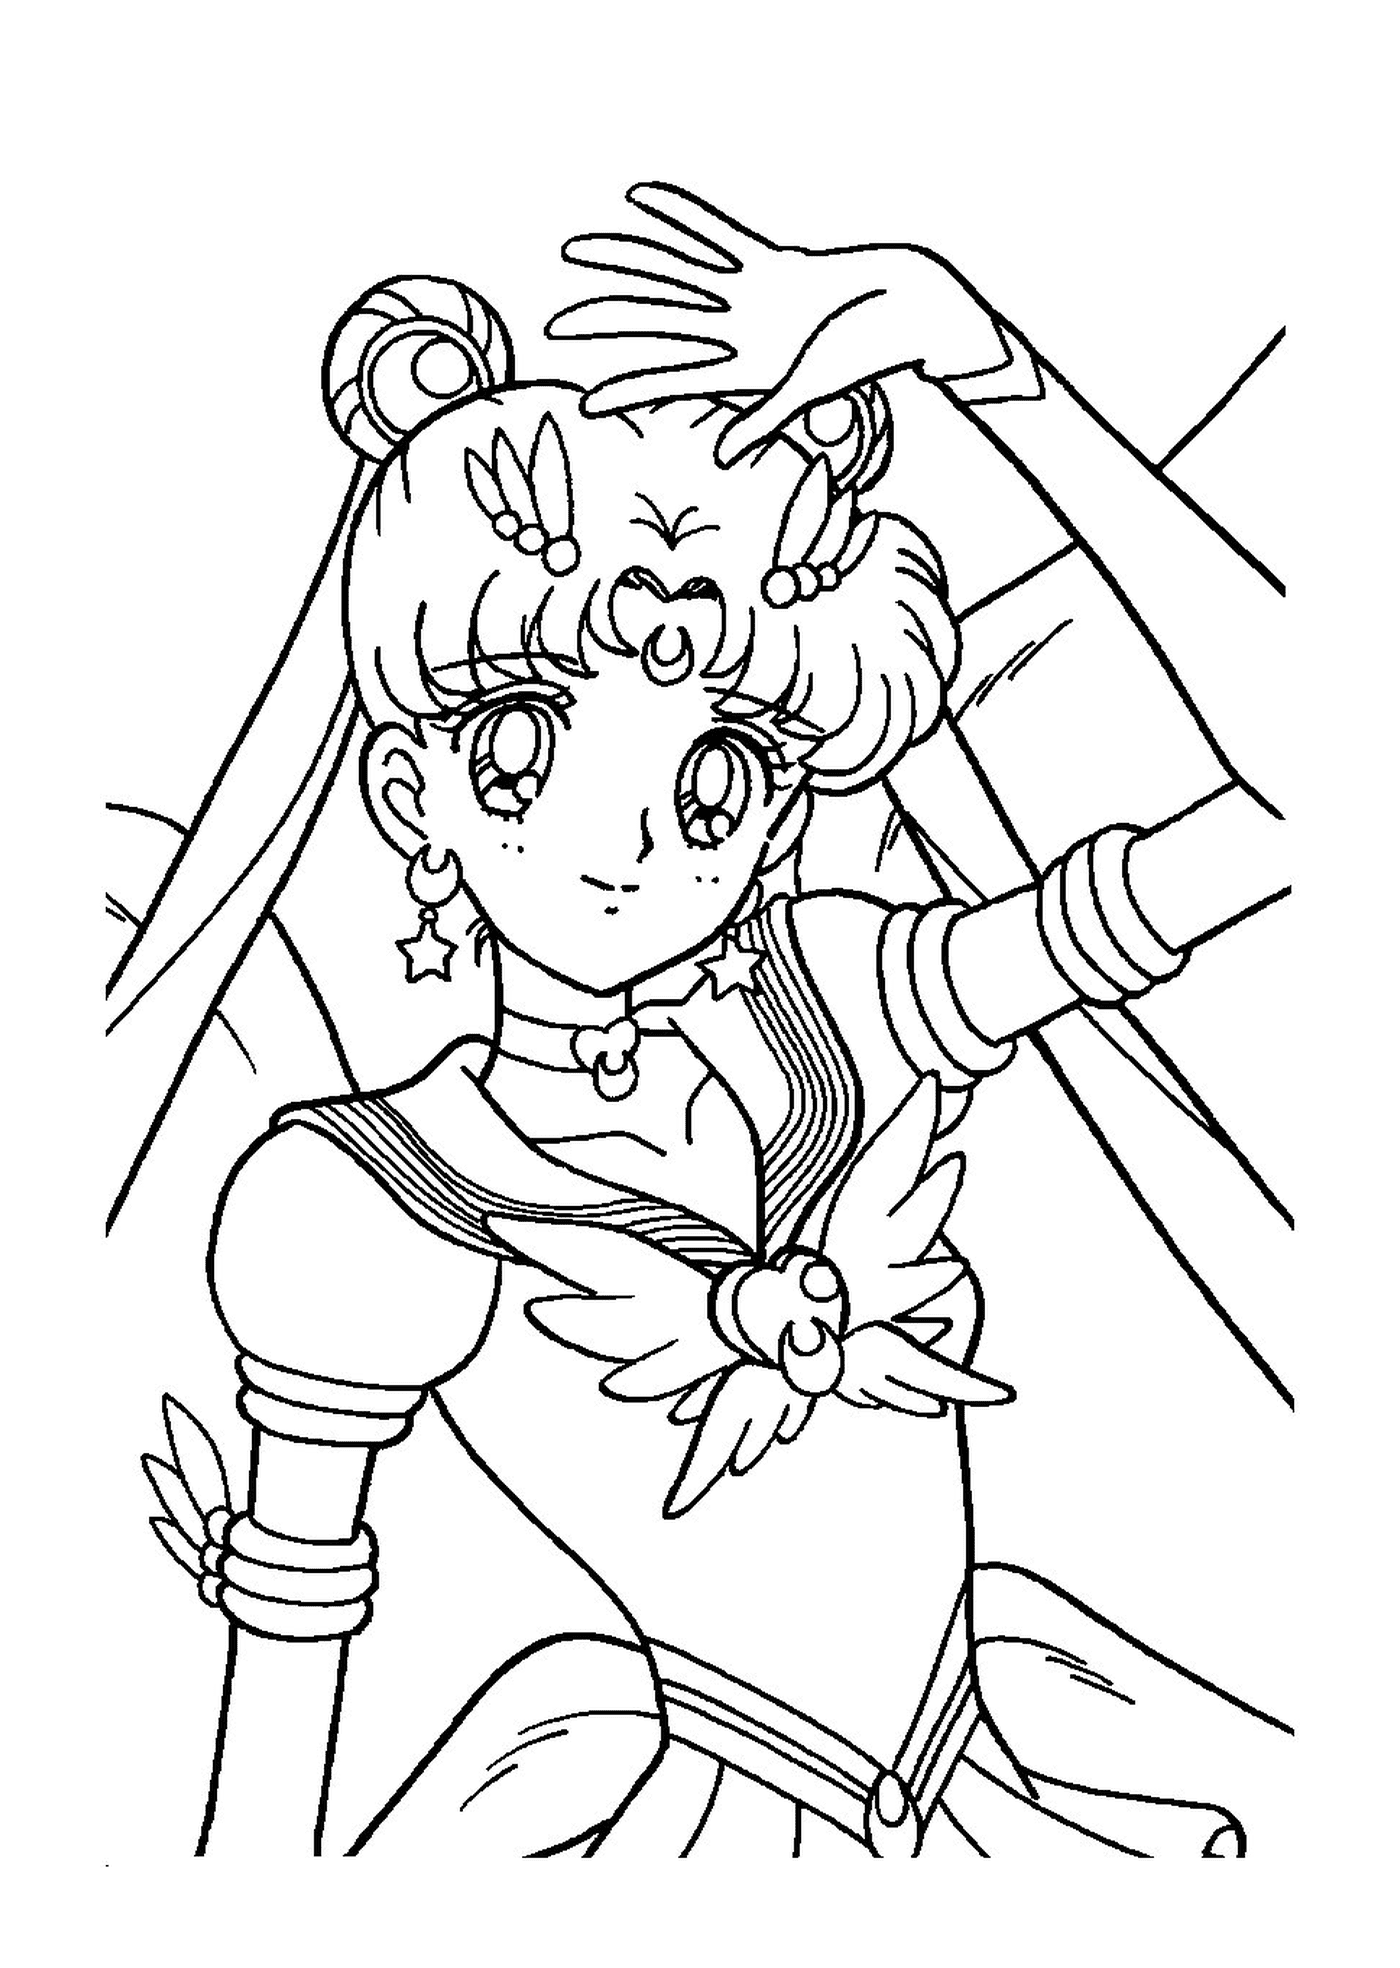  A character from Sailor Moon 